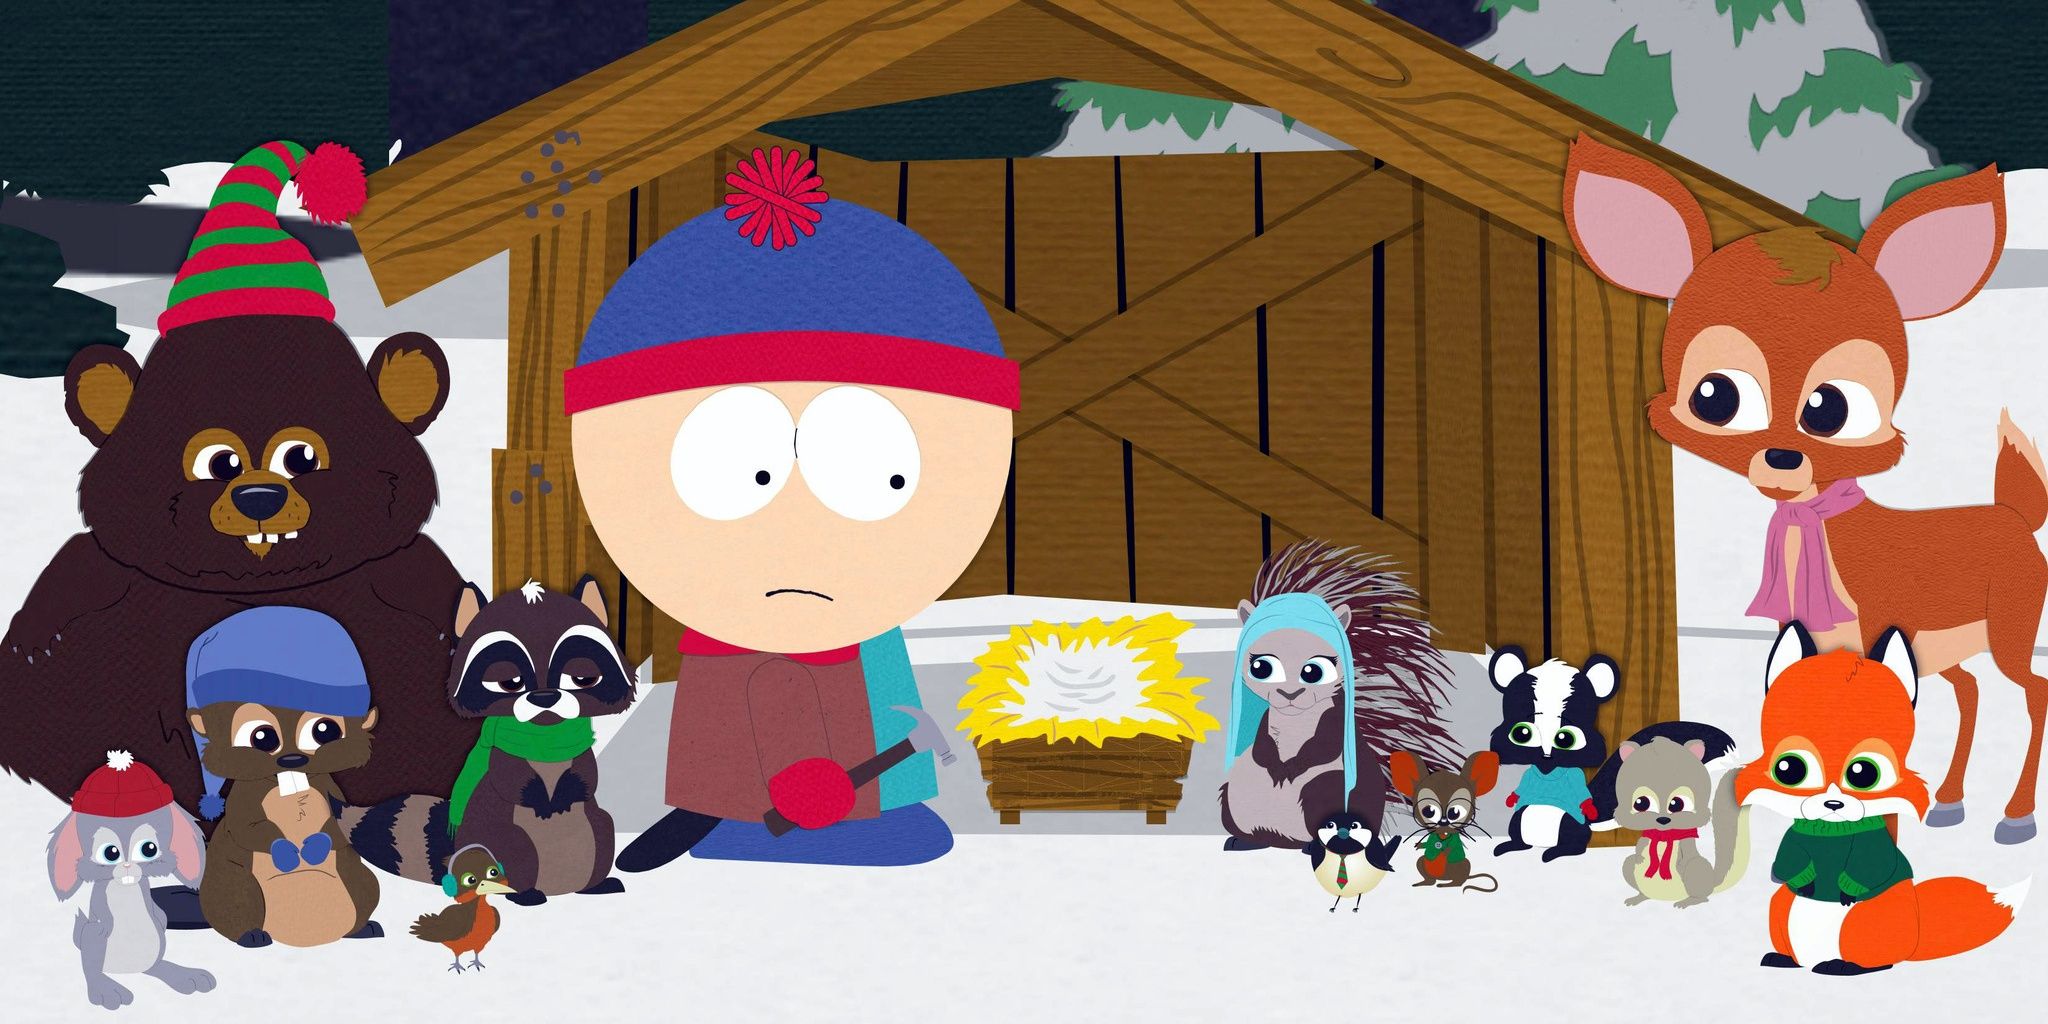 Woodland Critter Christmas, a South Park episode